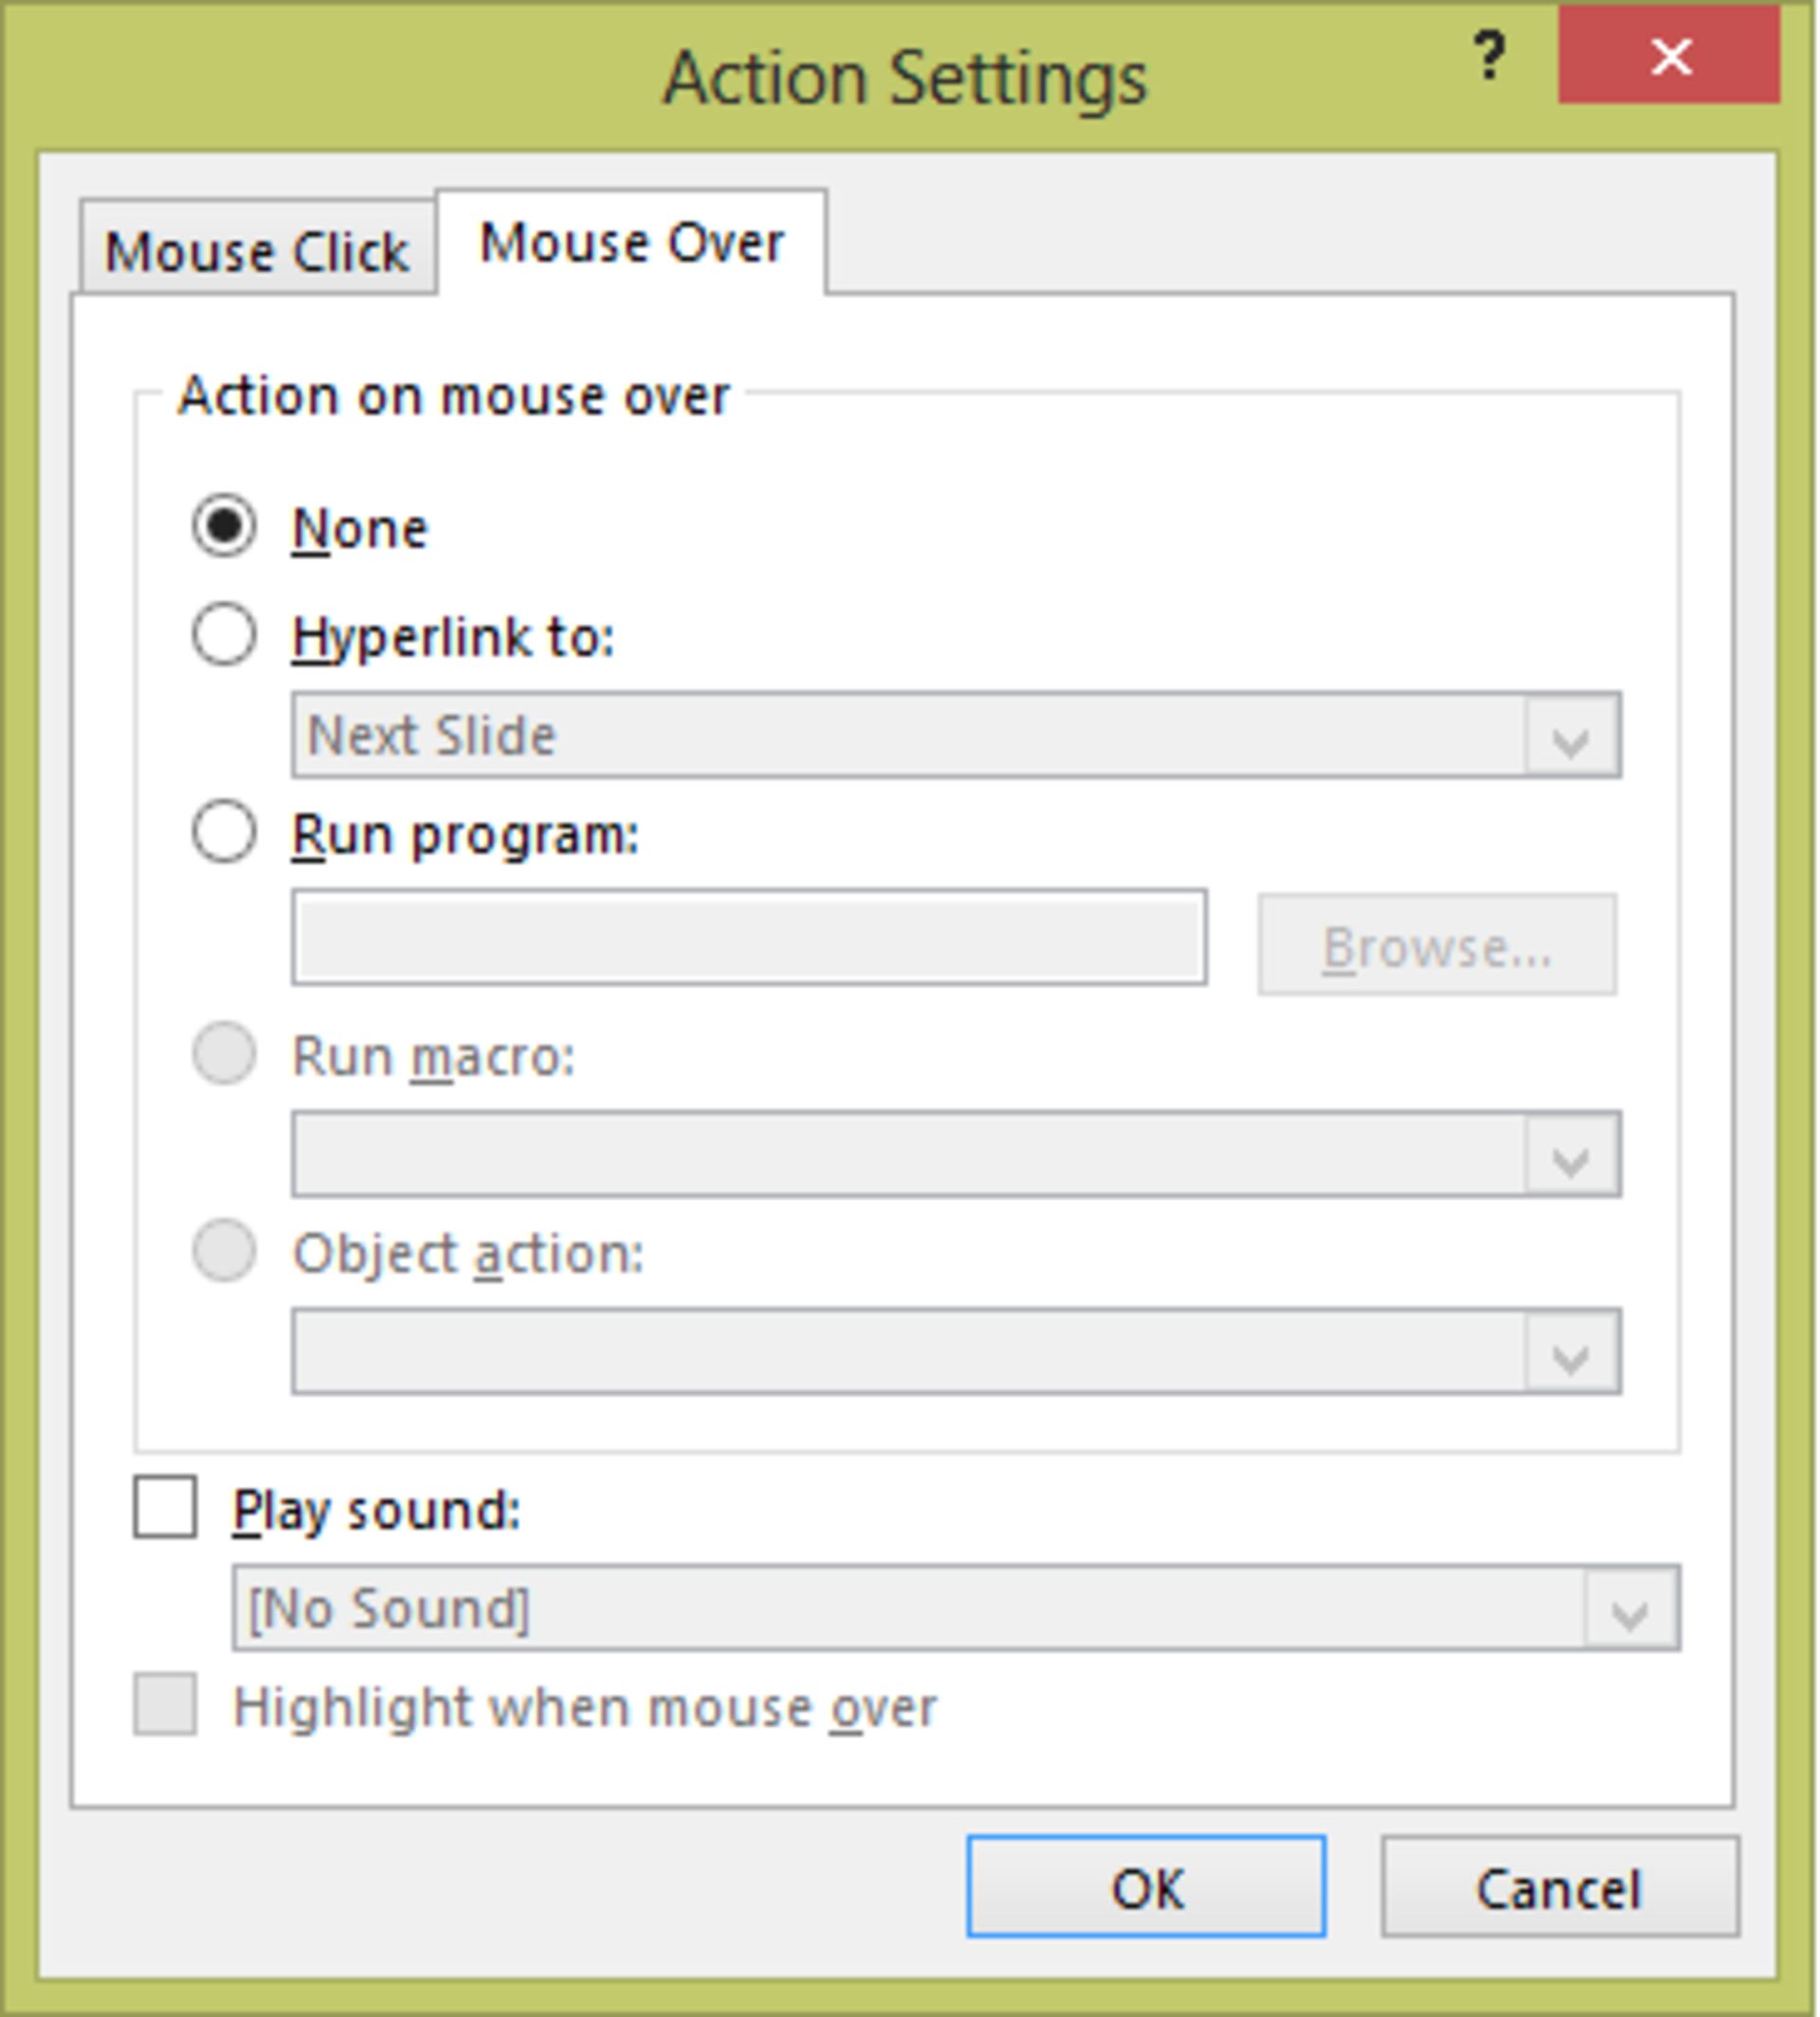 Action-Settings-Mouse-Over